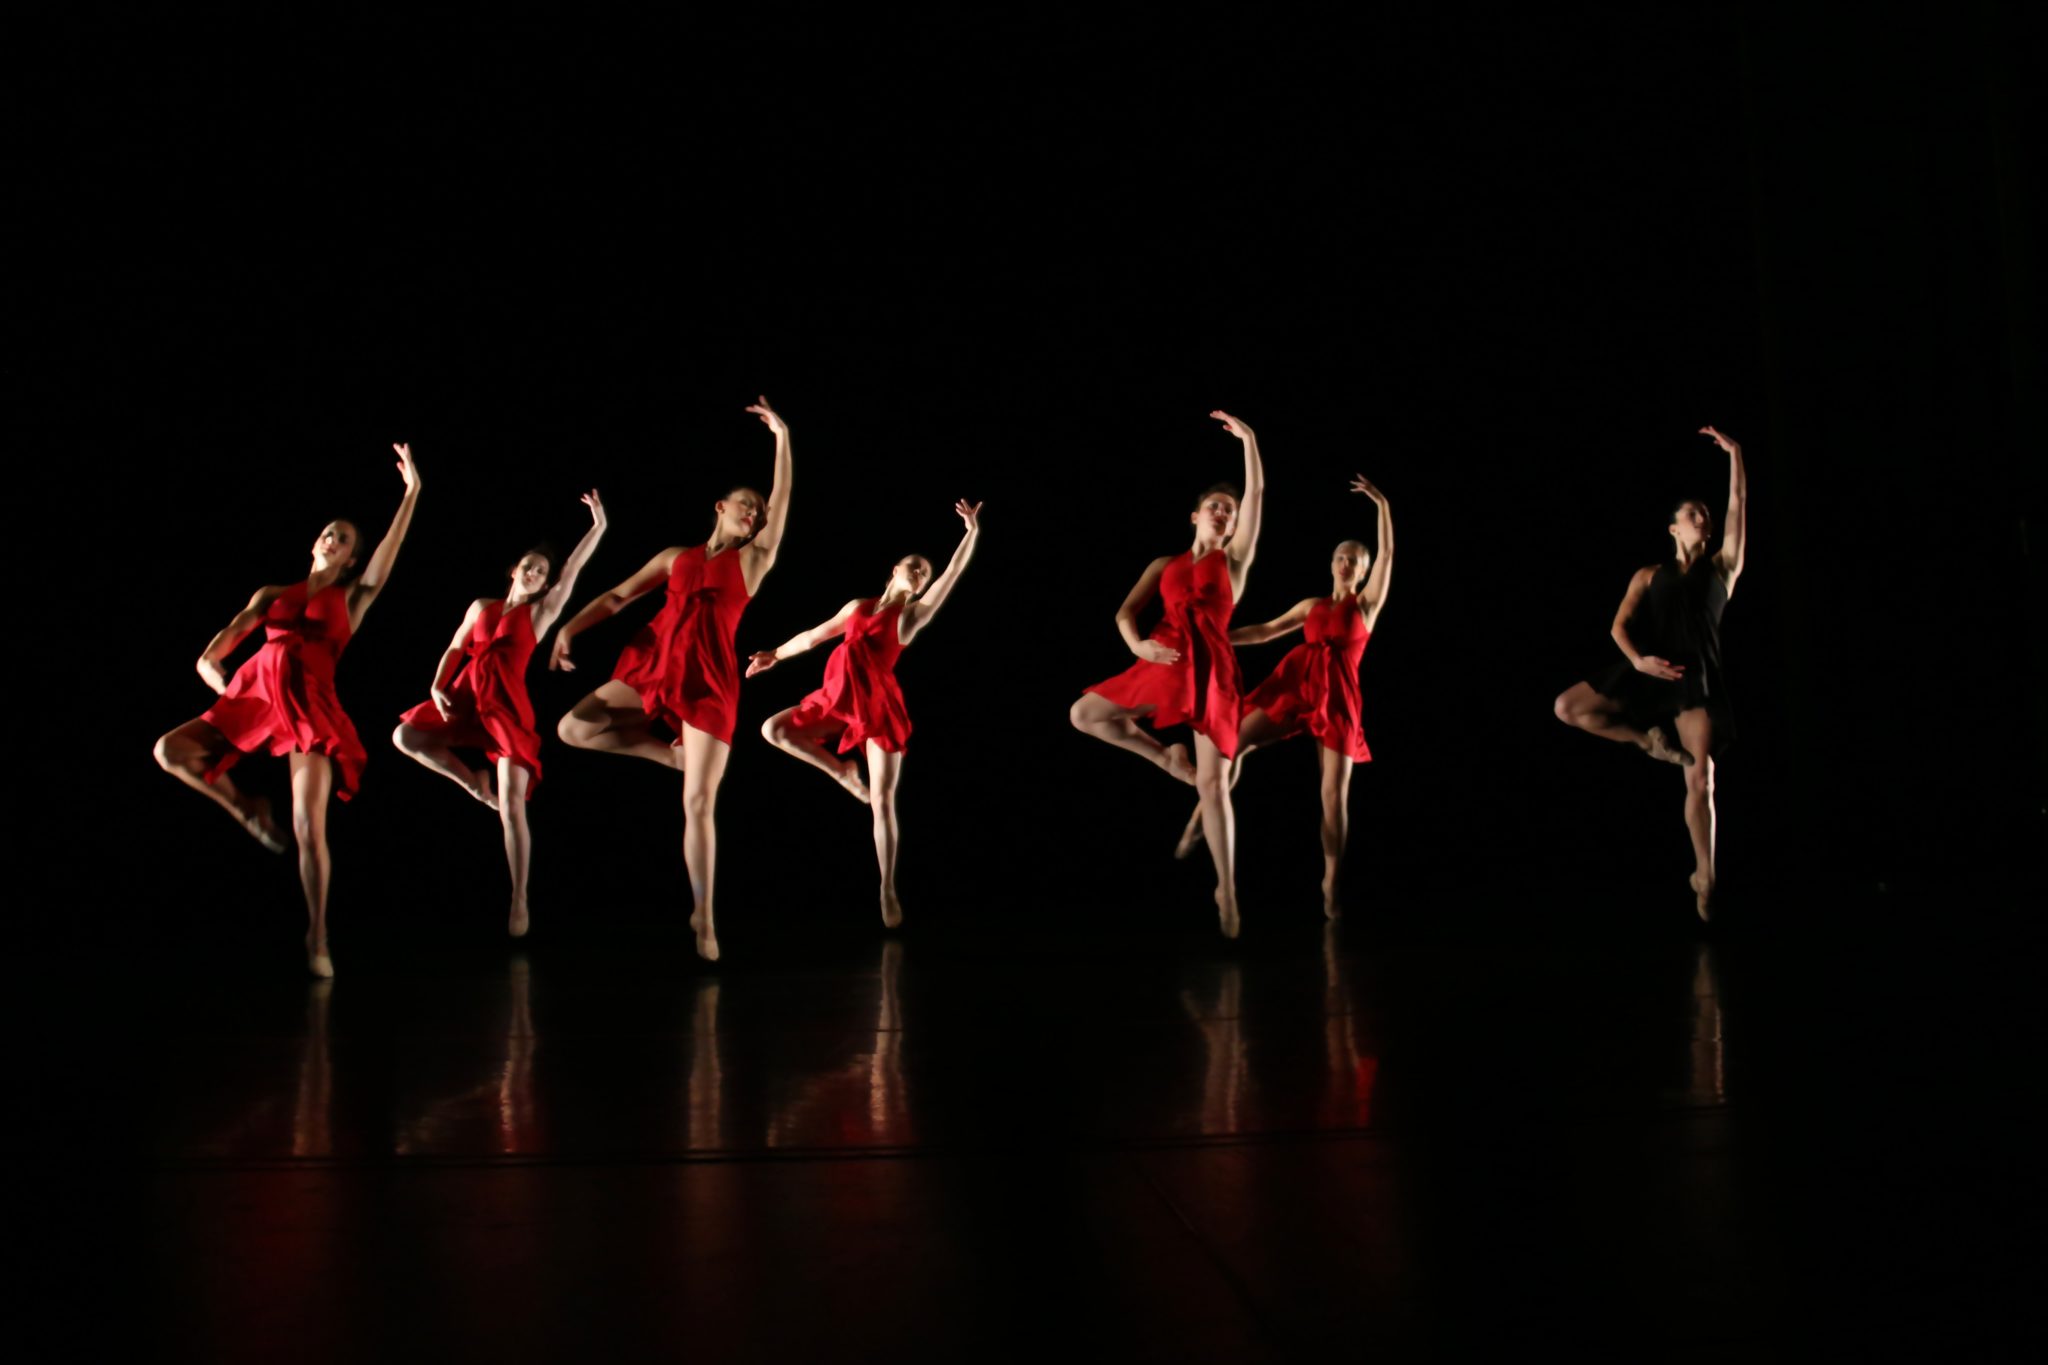 Dancers wearing red dresses, dancing on stage